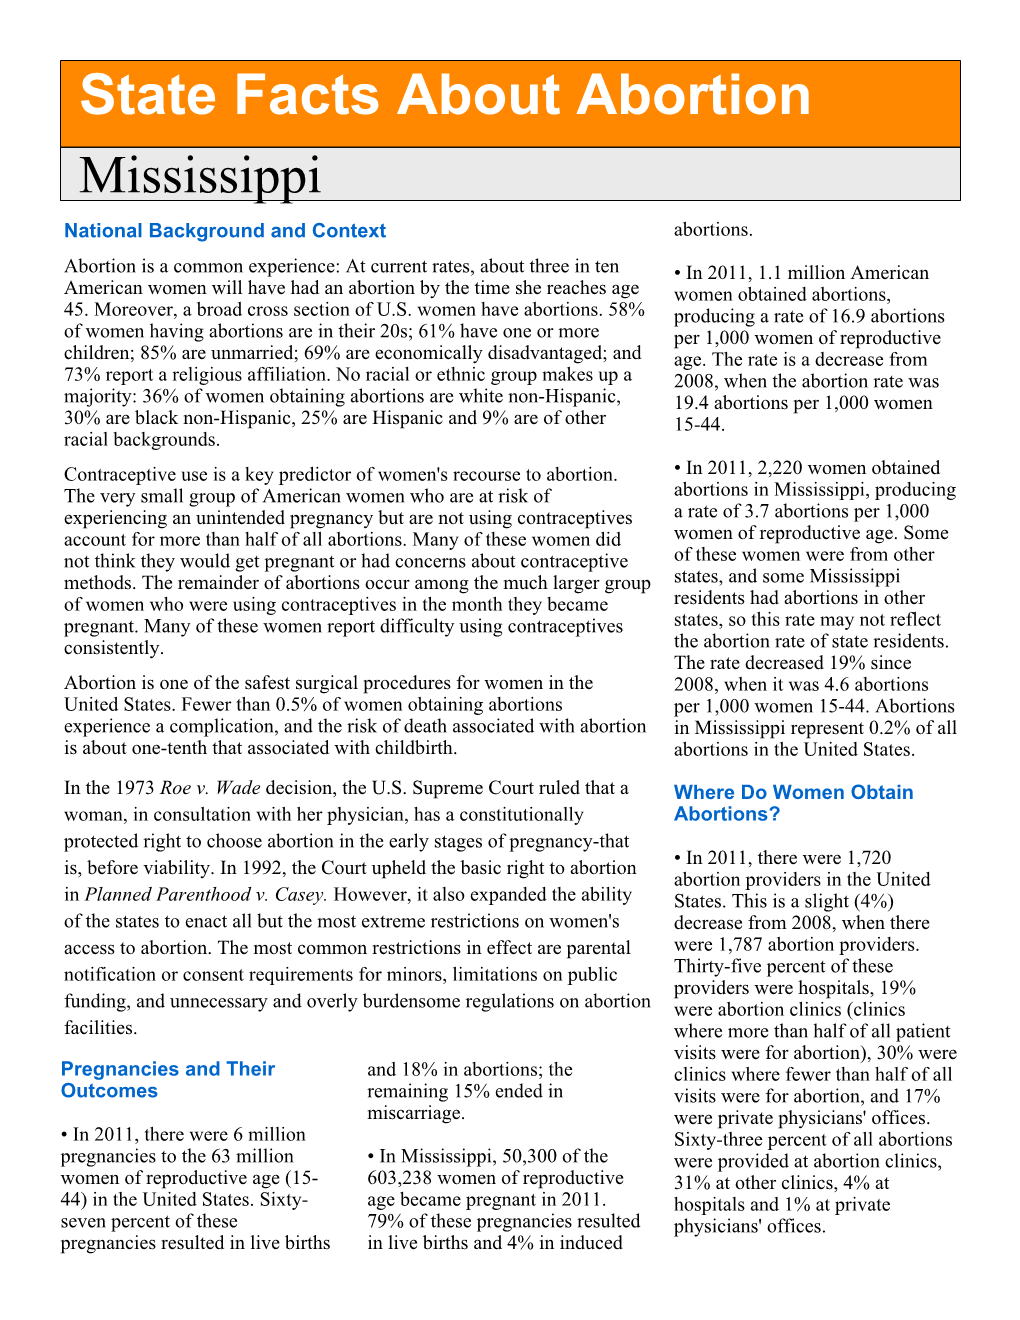 State Facts About Abortion Mississippi National Background and Context Abortions